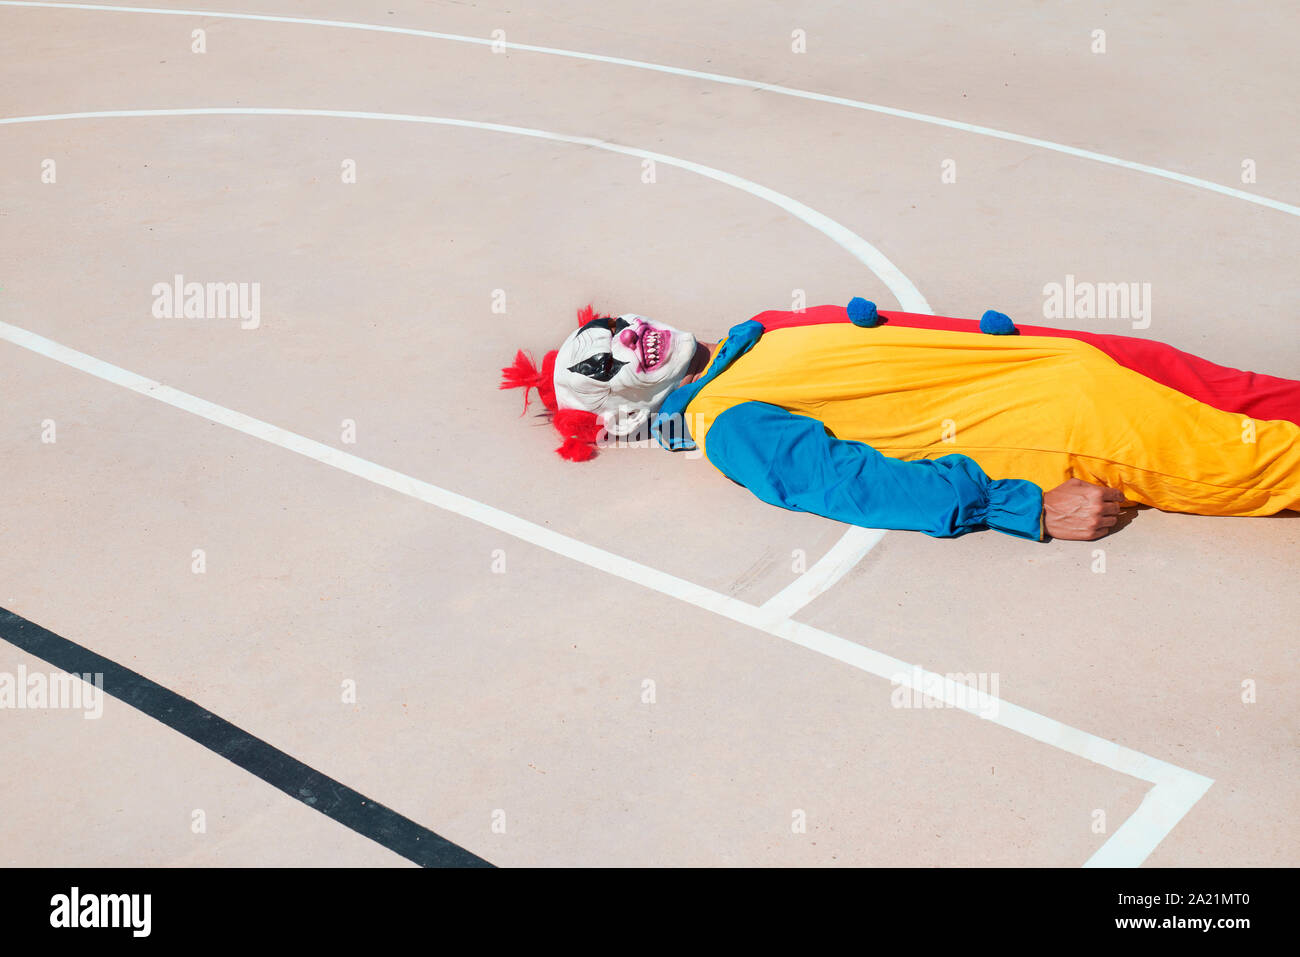 a scary clown, wearing a colorful yellow, red and blue costume, lying face up on an outdoor basketball court Stock Photo